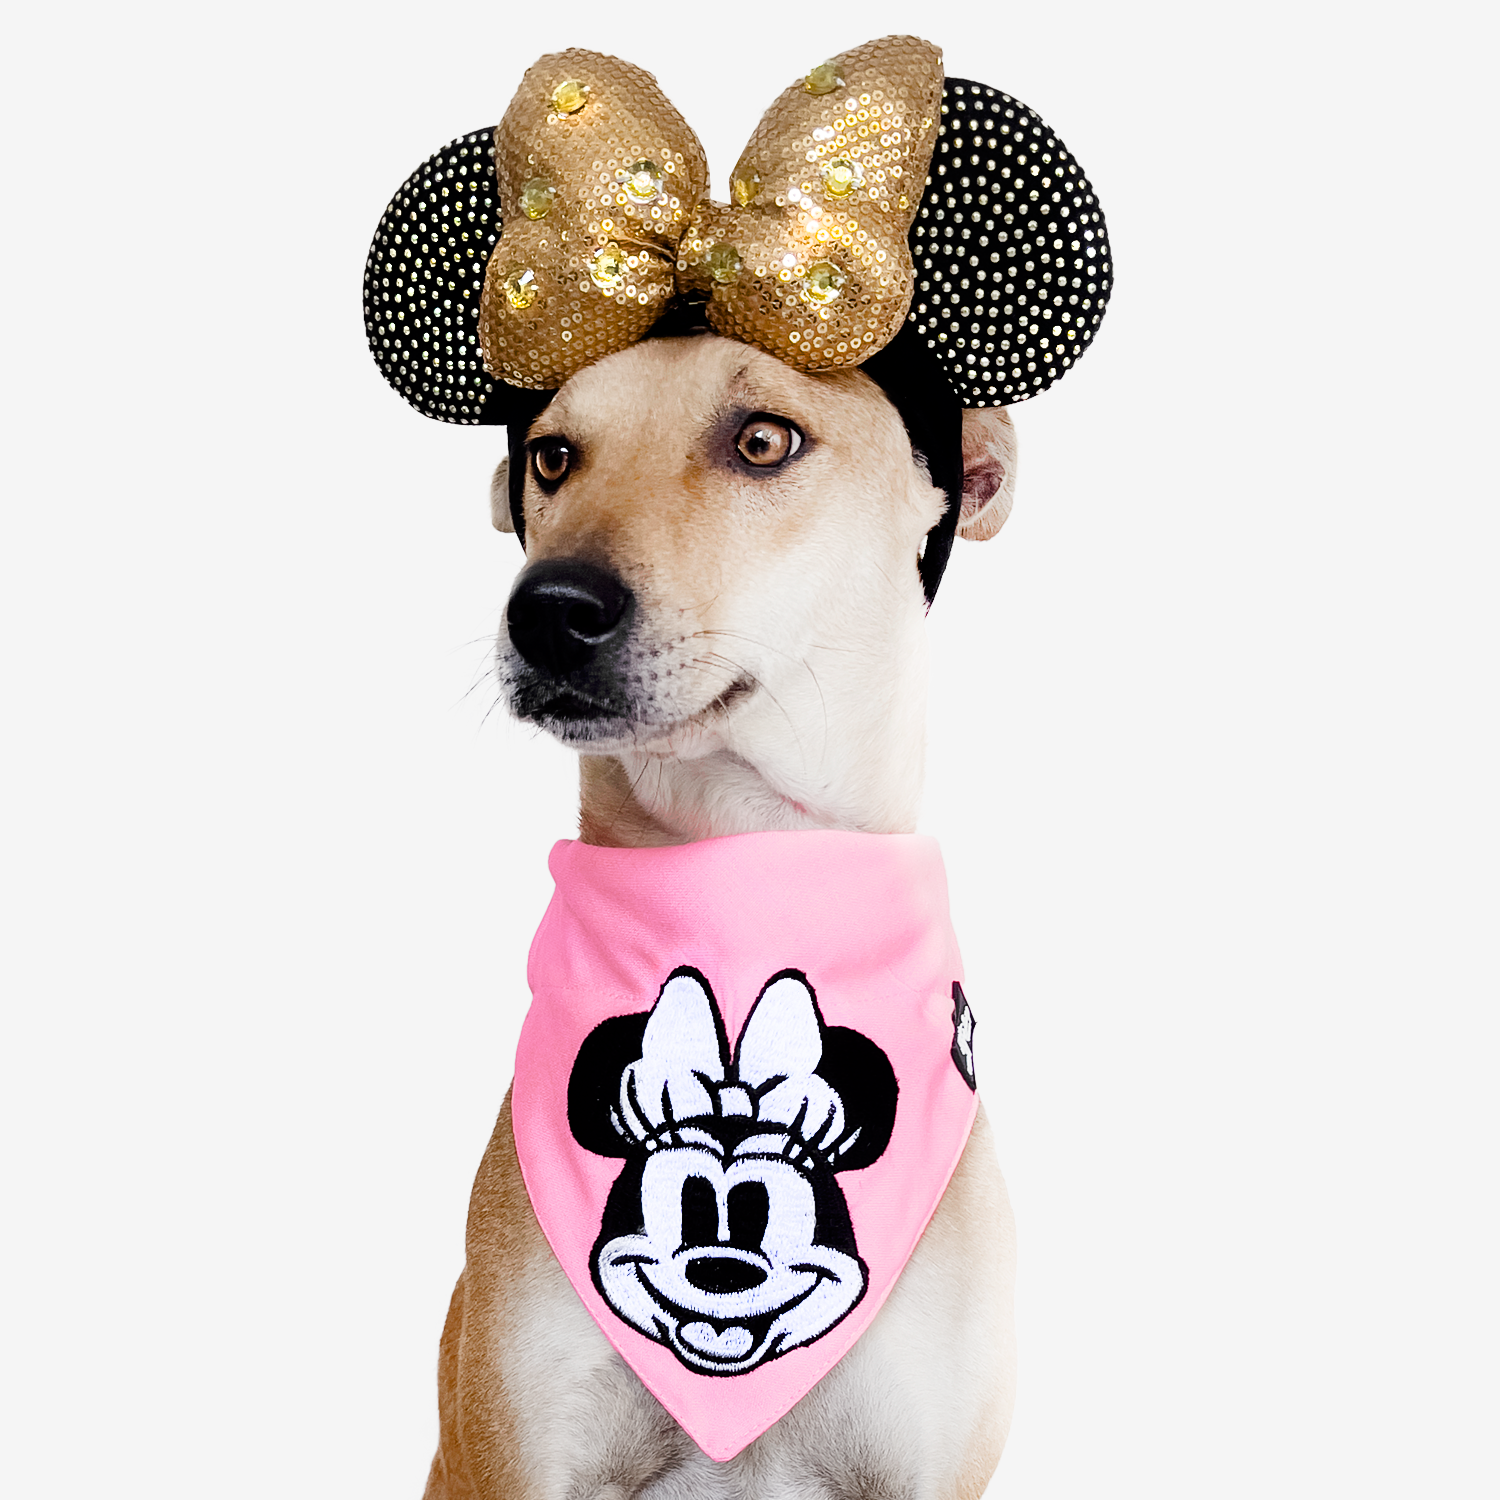 TDIT X Disney Minnie Mouse Embroidered Dog Bandana with collar That Dog In Tuxedo